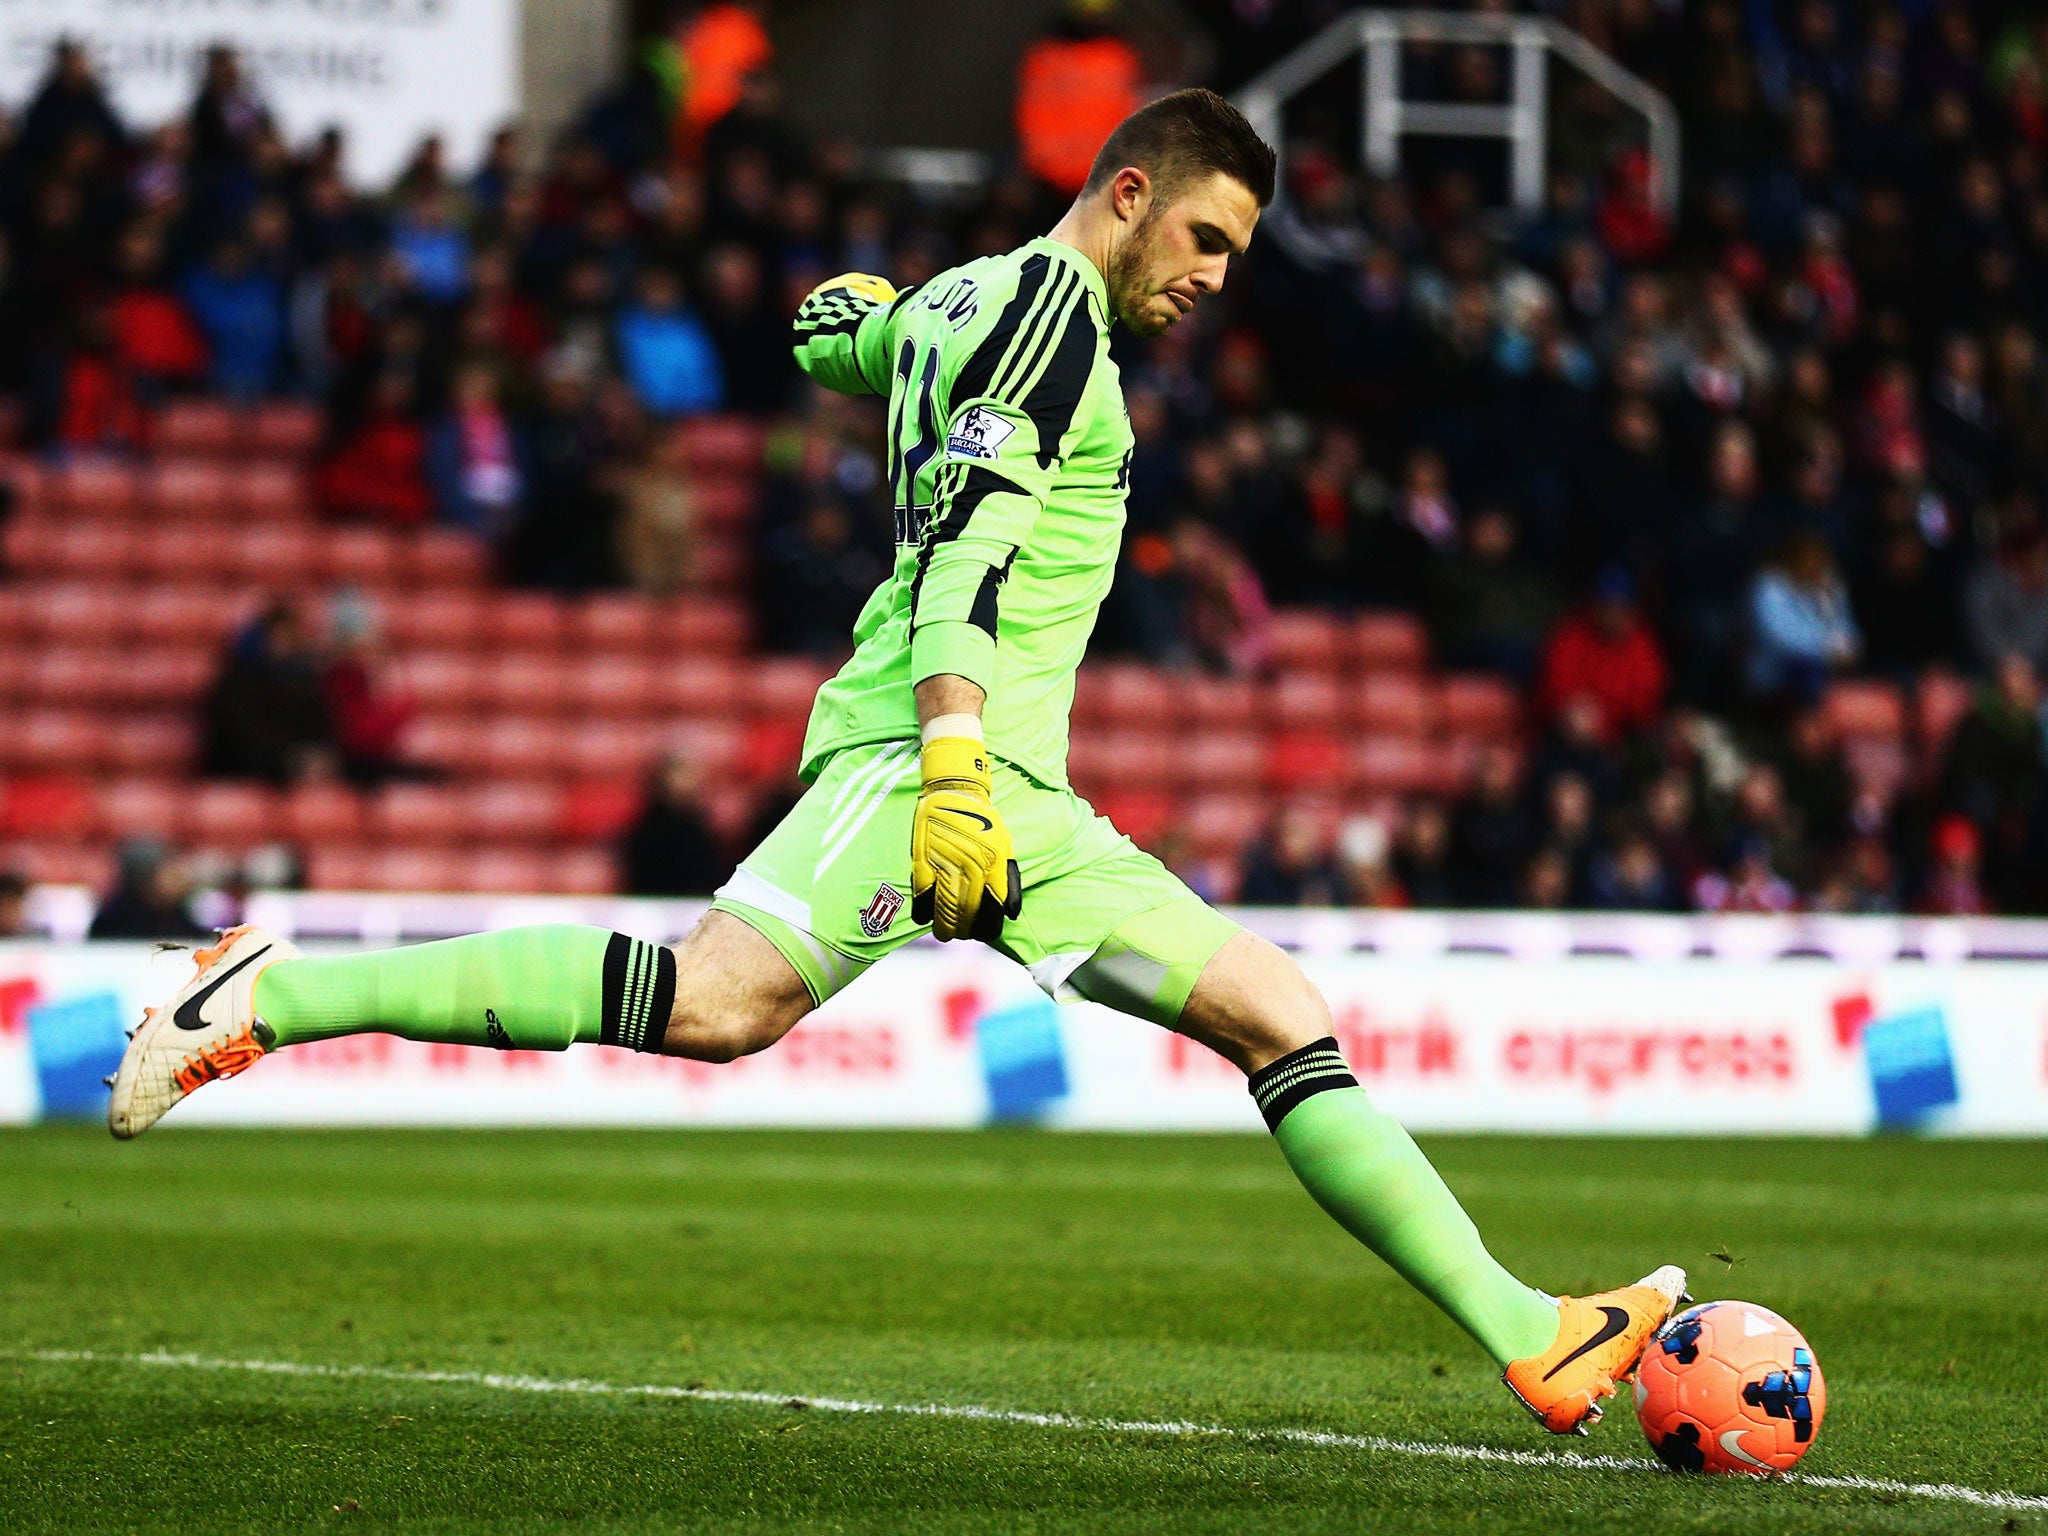 Stoke goalkeeper Jack Butland still maintains hopes of being included in the England squad for the 2014 World Cup in Brazil